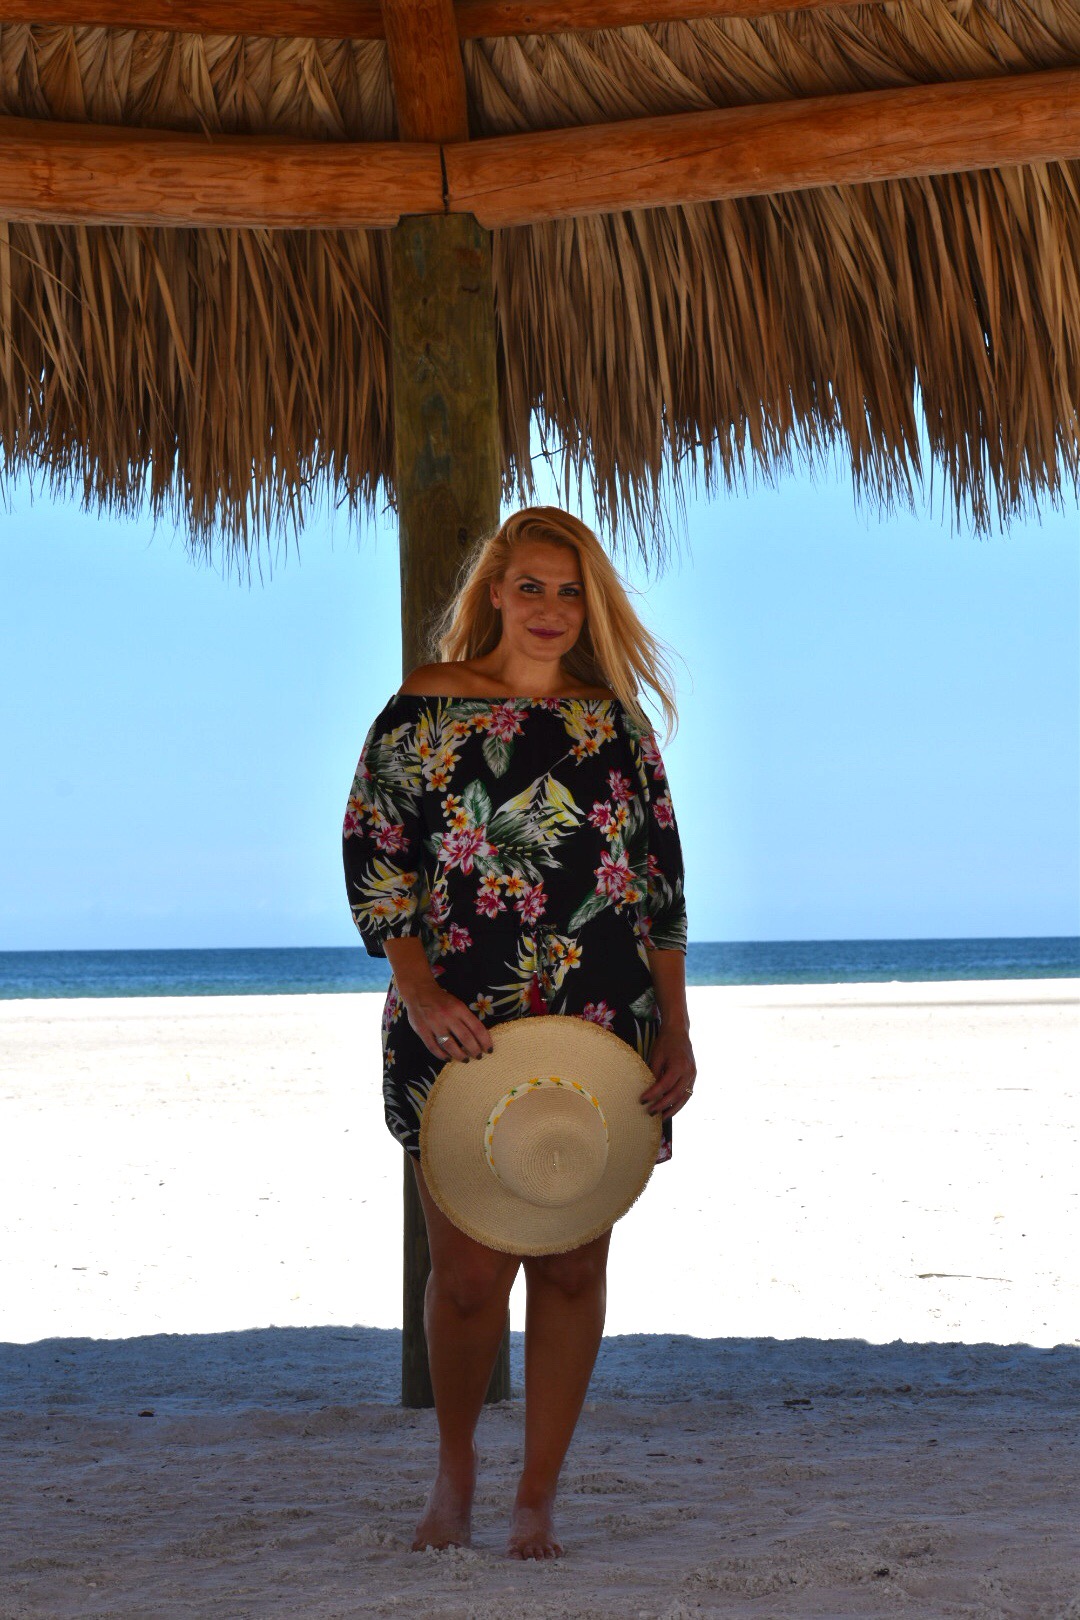 Floral Dress, Off The Shoulder Dress, Tropical Dress, Beach Cover-up and Beach Hat in Marco Island Florida